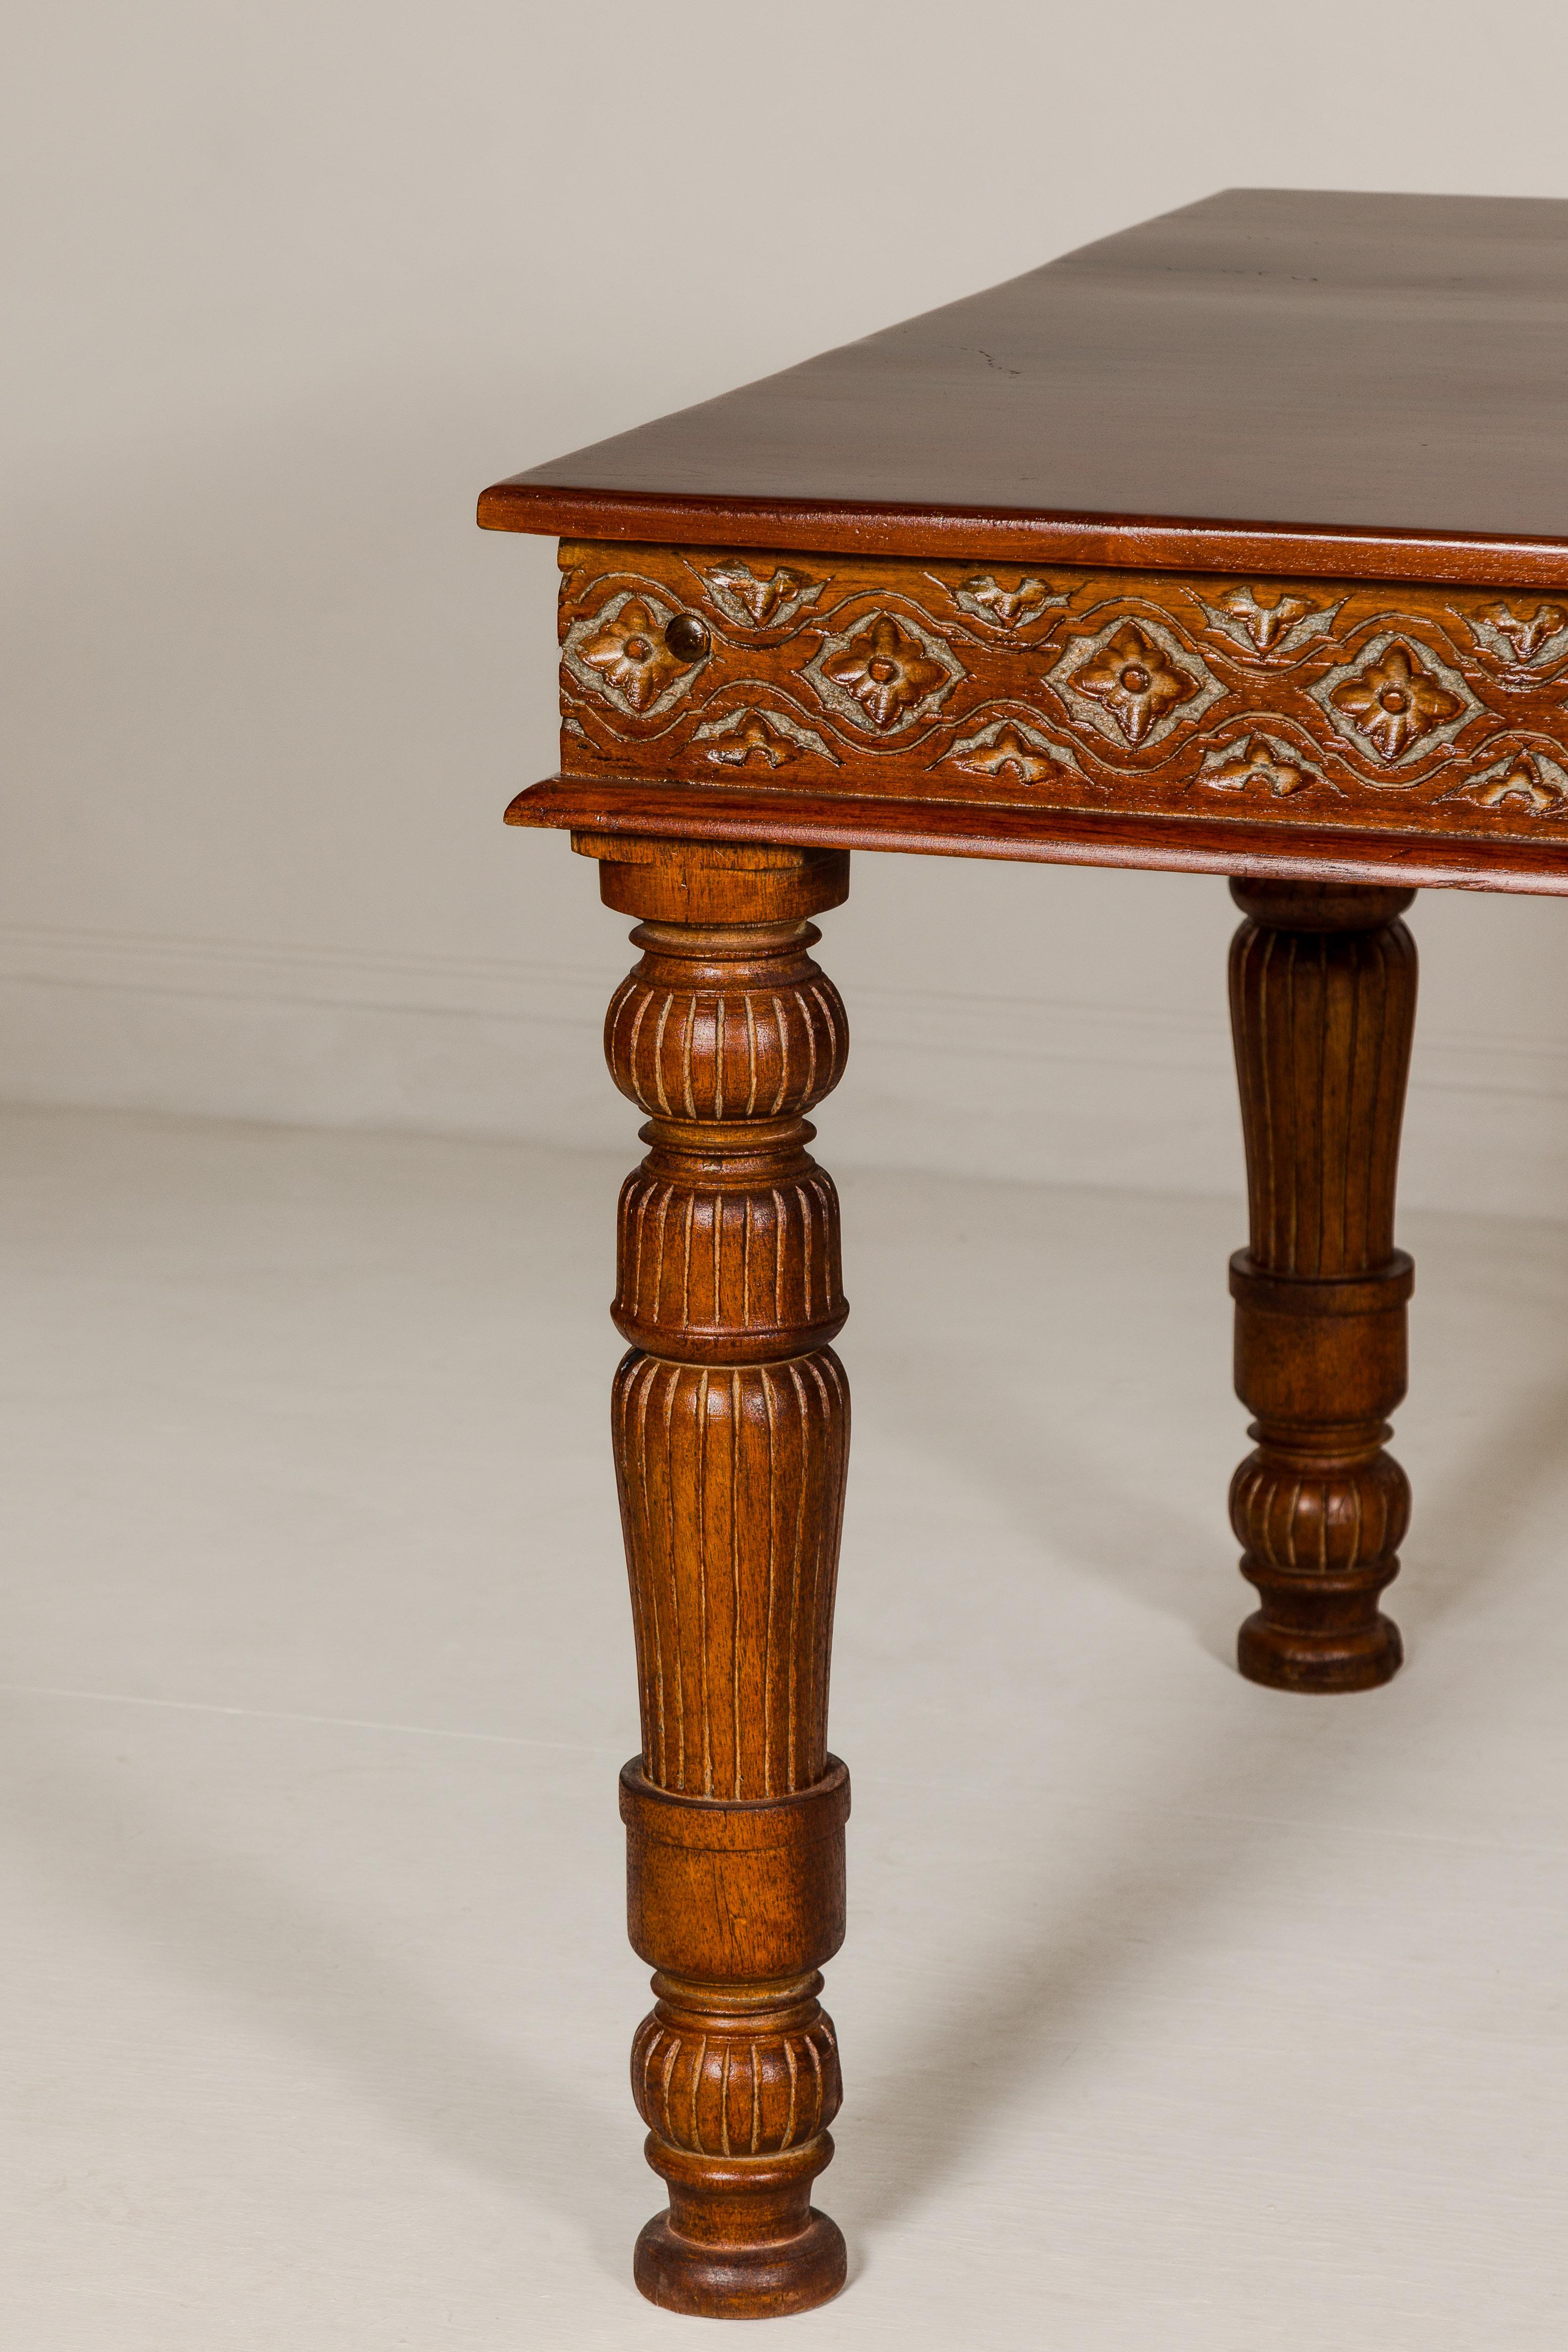 Wood Large Dining Room Table with Carved Apron, Floral Motifs and Turned Legs For Sale